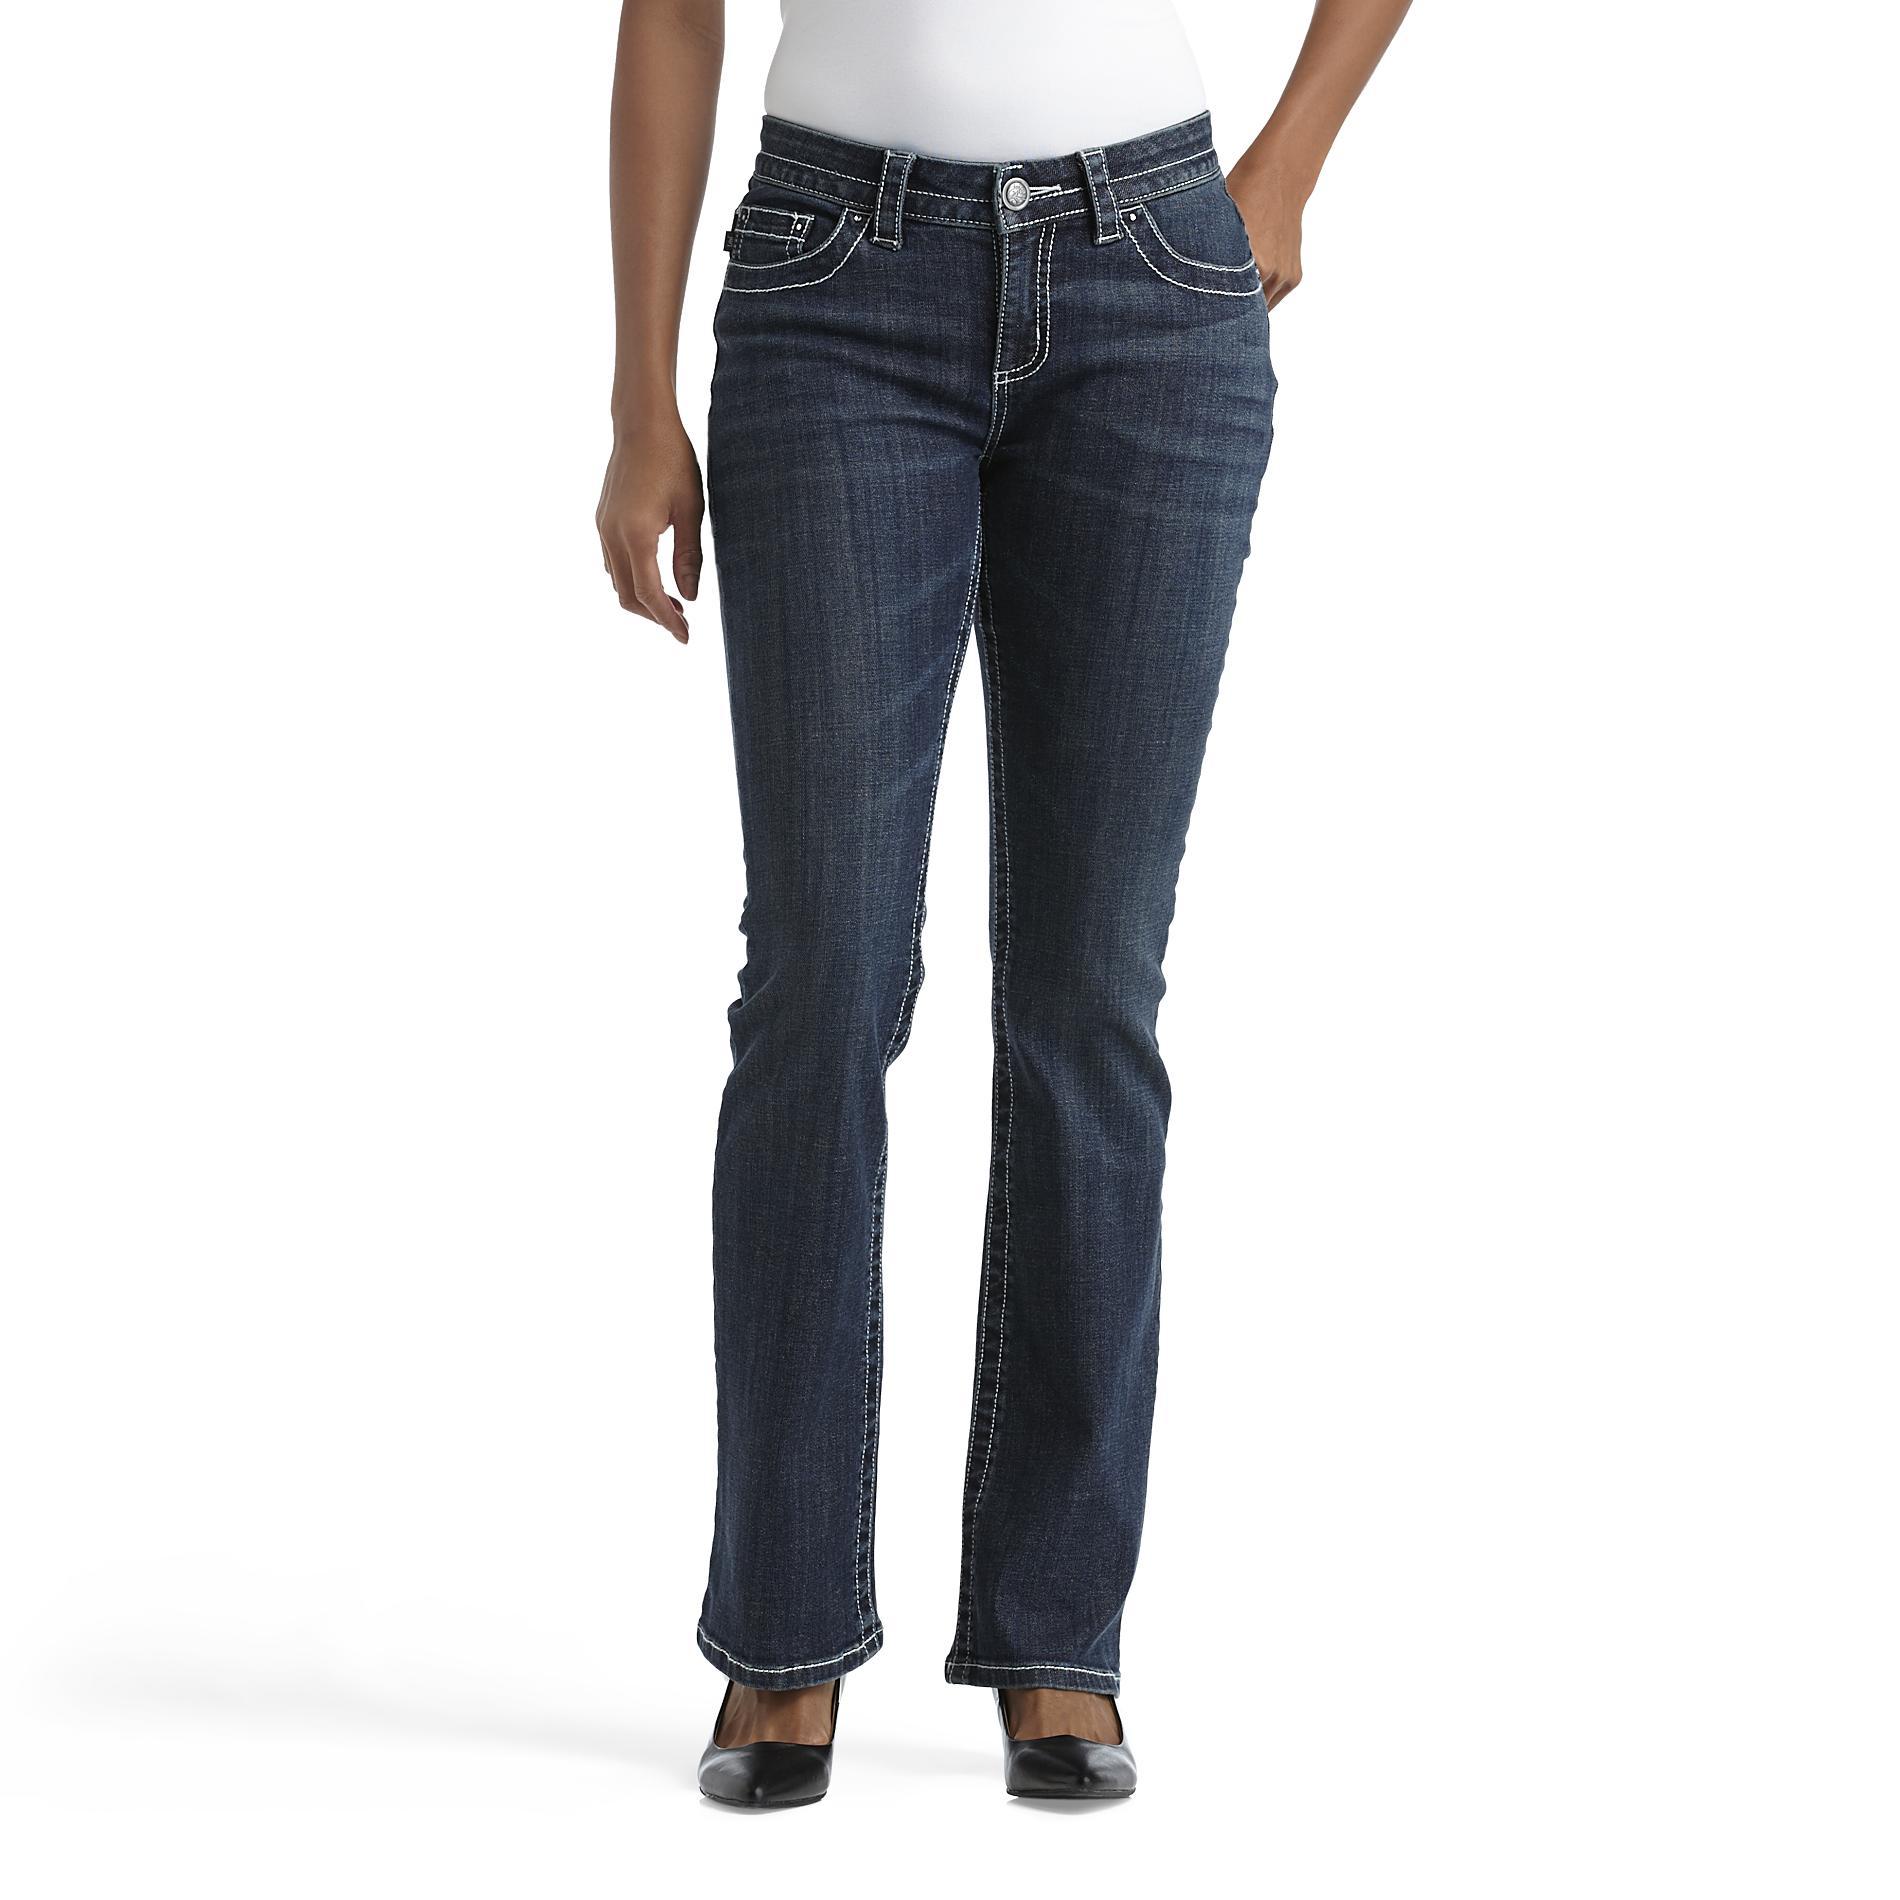 LEE Women's Barely Bootcut Jeans - Clothing, Shoes & Jewelry - Clothing ...